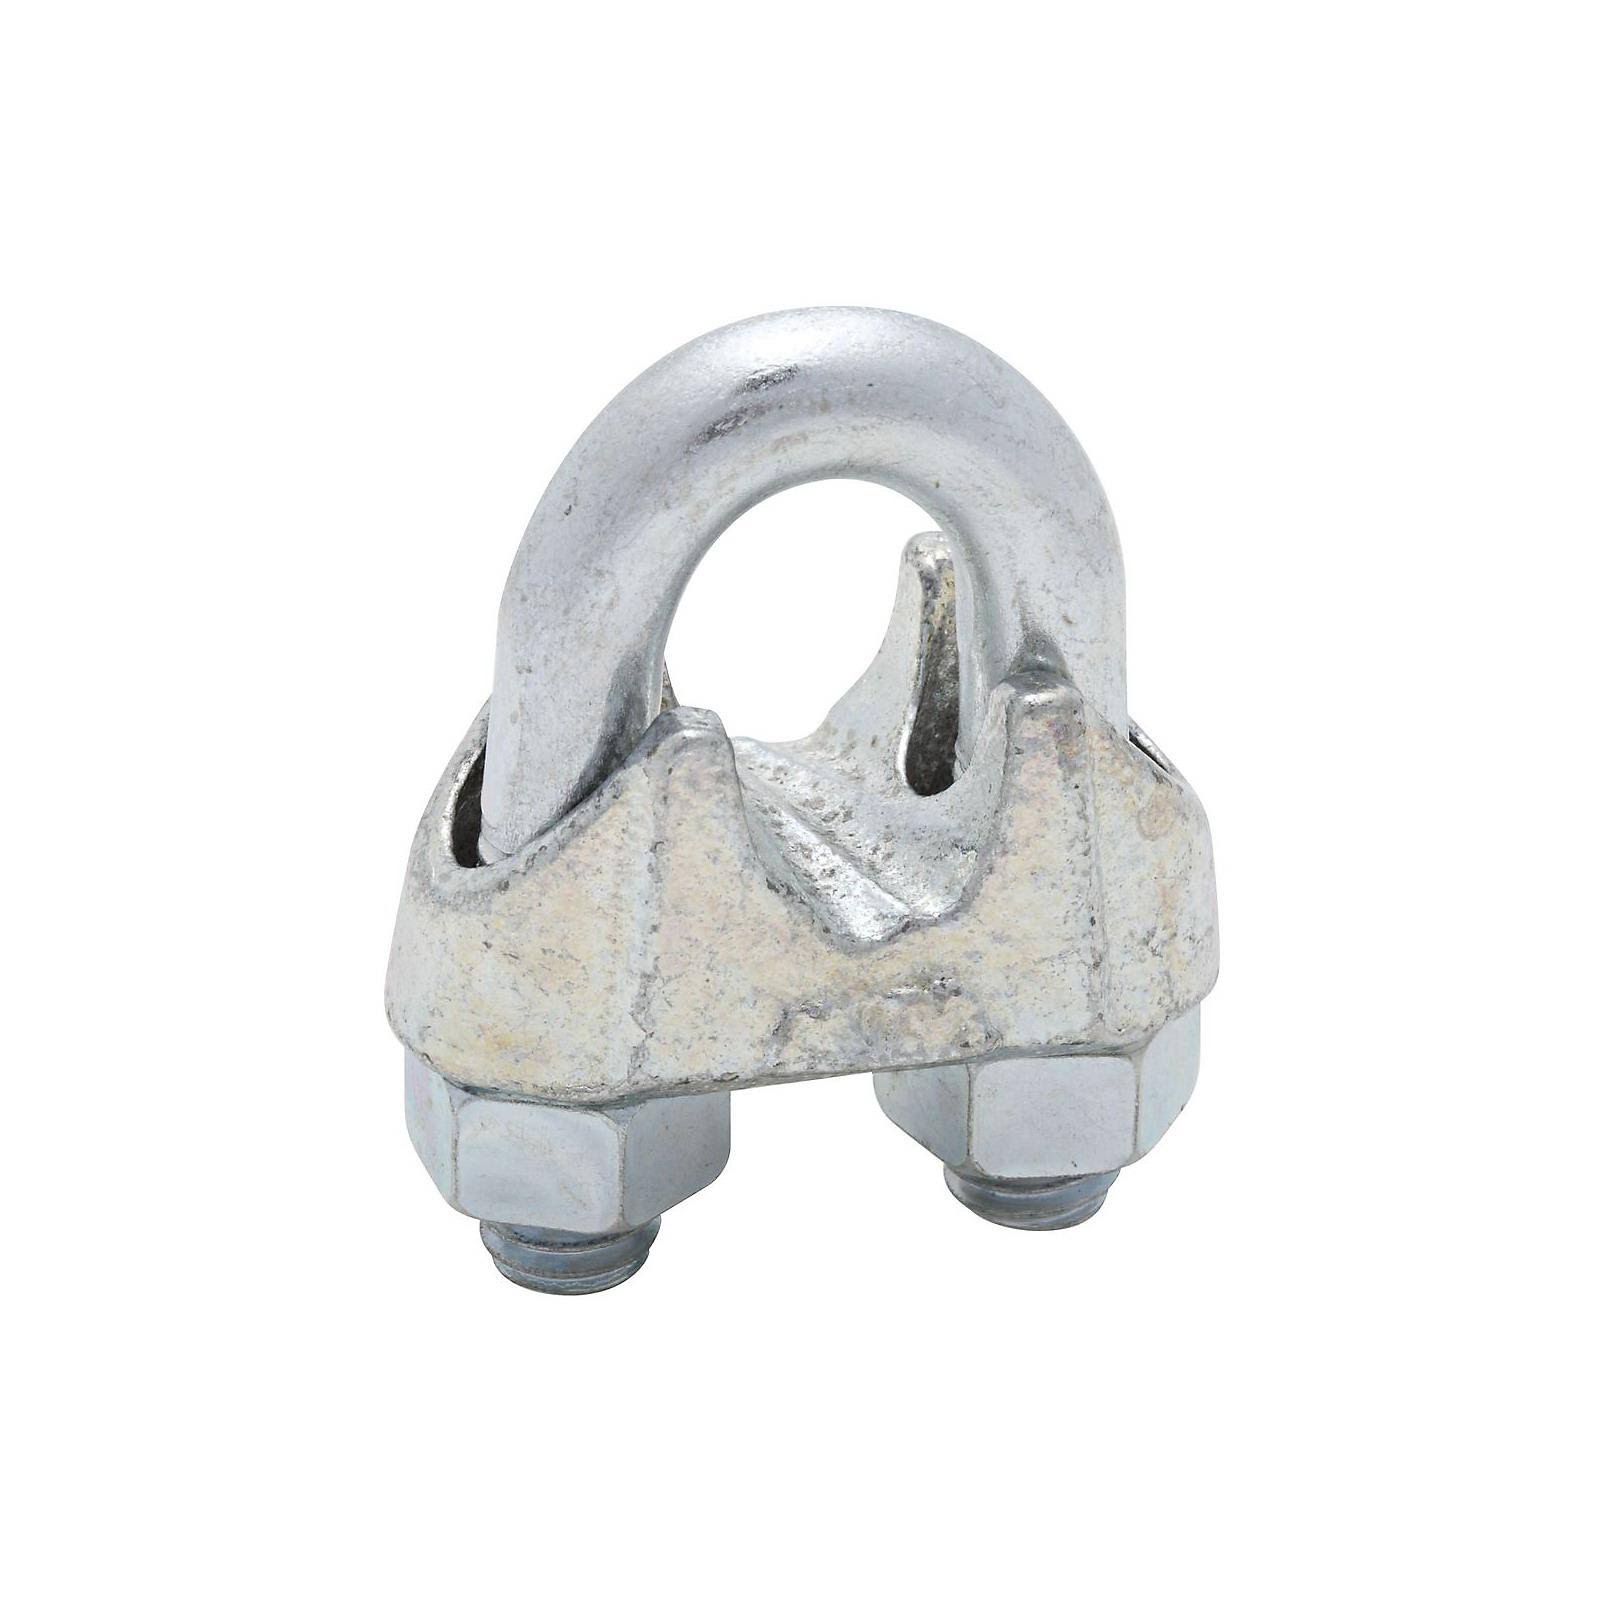 National Hardware Cable Clamp - Zinc Plated, 1/2"